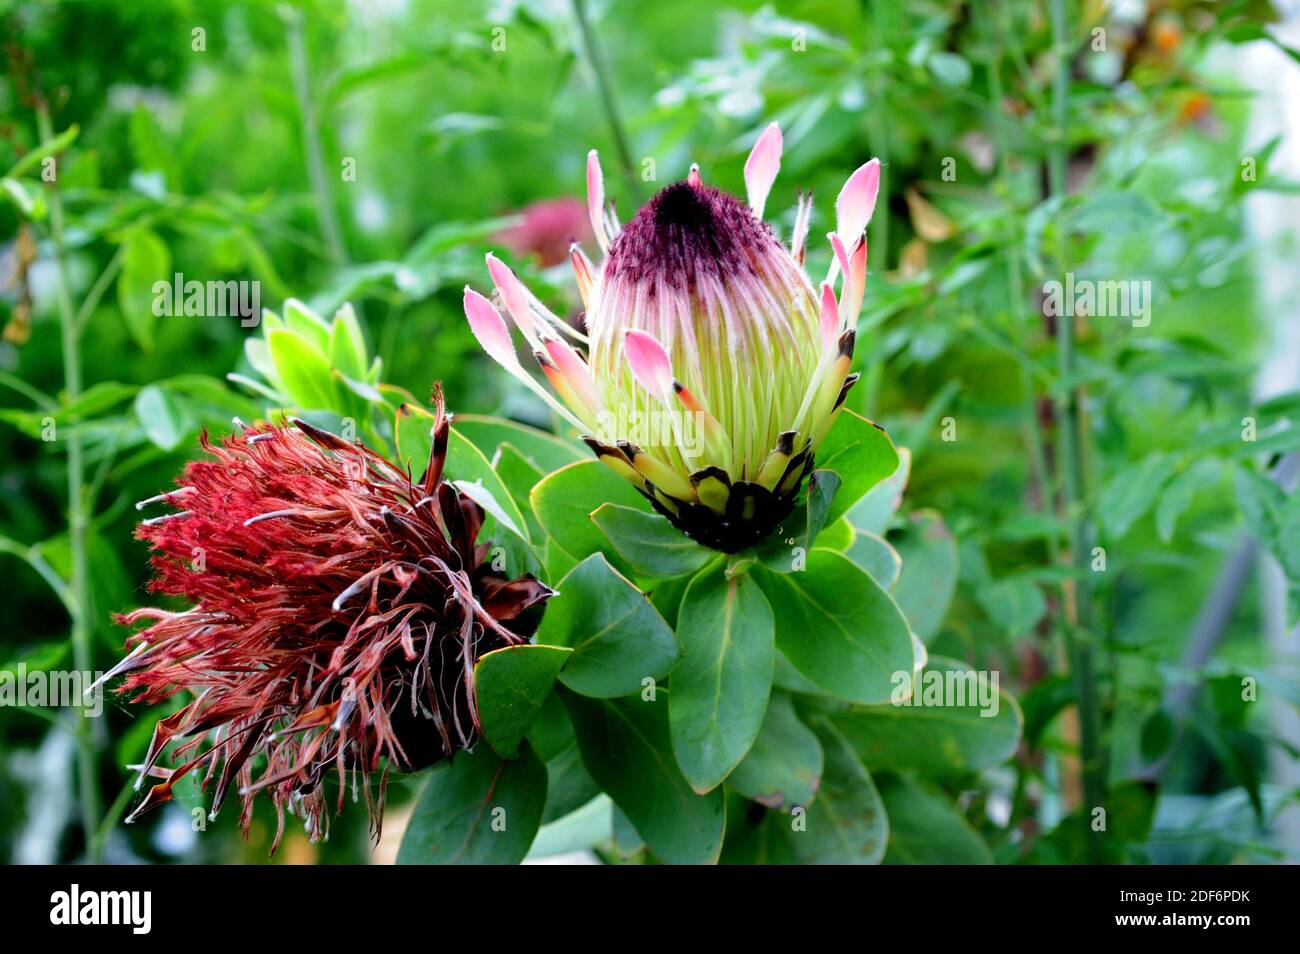 Broad-leaved sugarbush (Protea eximia) is a shrub native to South Africa. Inflorescences detail. Stock Photo